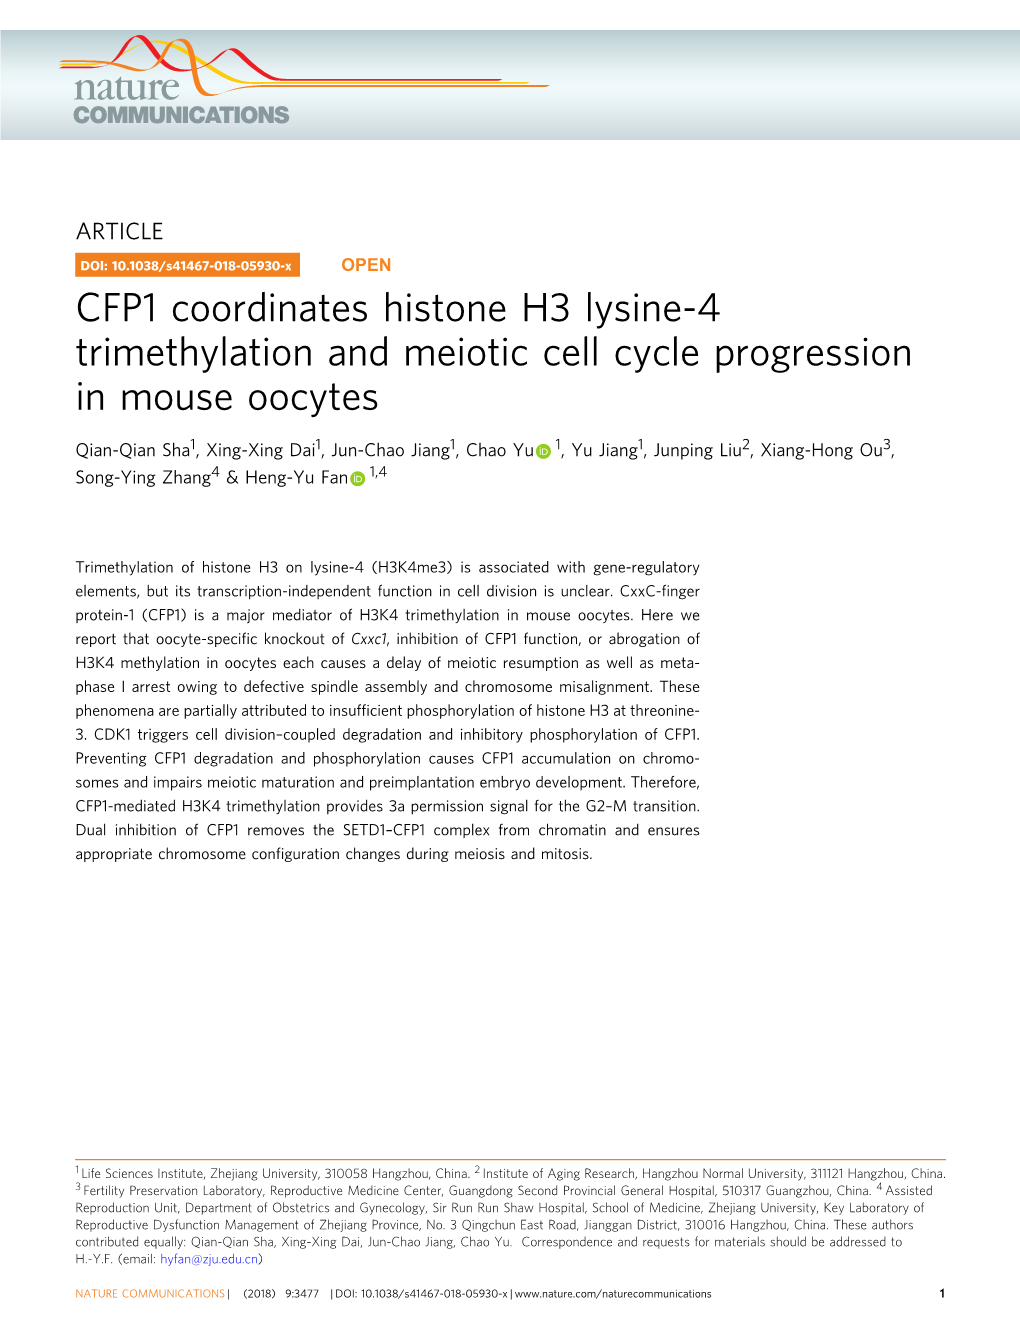 CFP1 Coordinates Histone H3 Lysine-4 Trimethylation and Meiotic Cell Cycle Progression in Mouse Oocytes